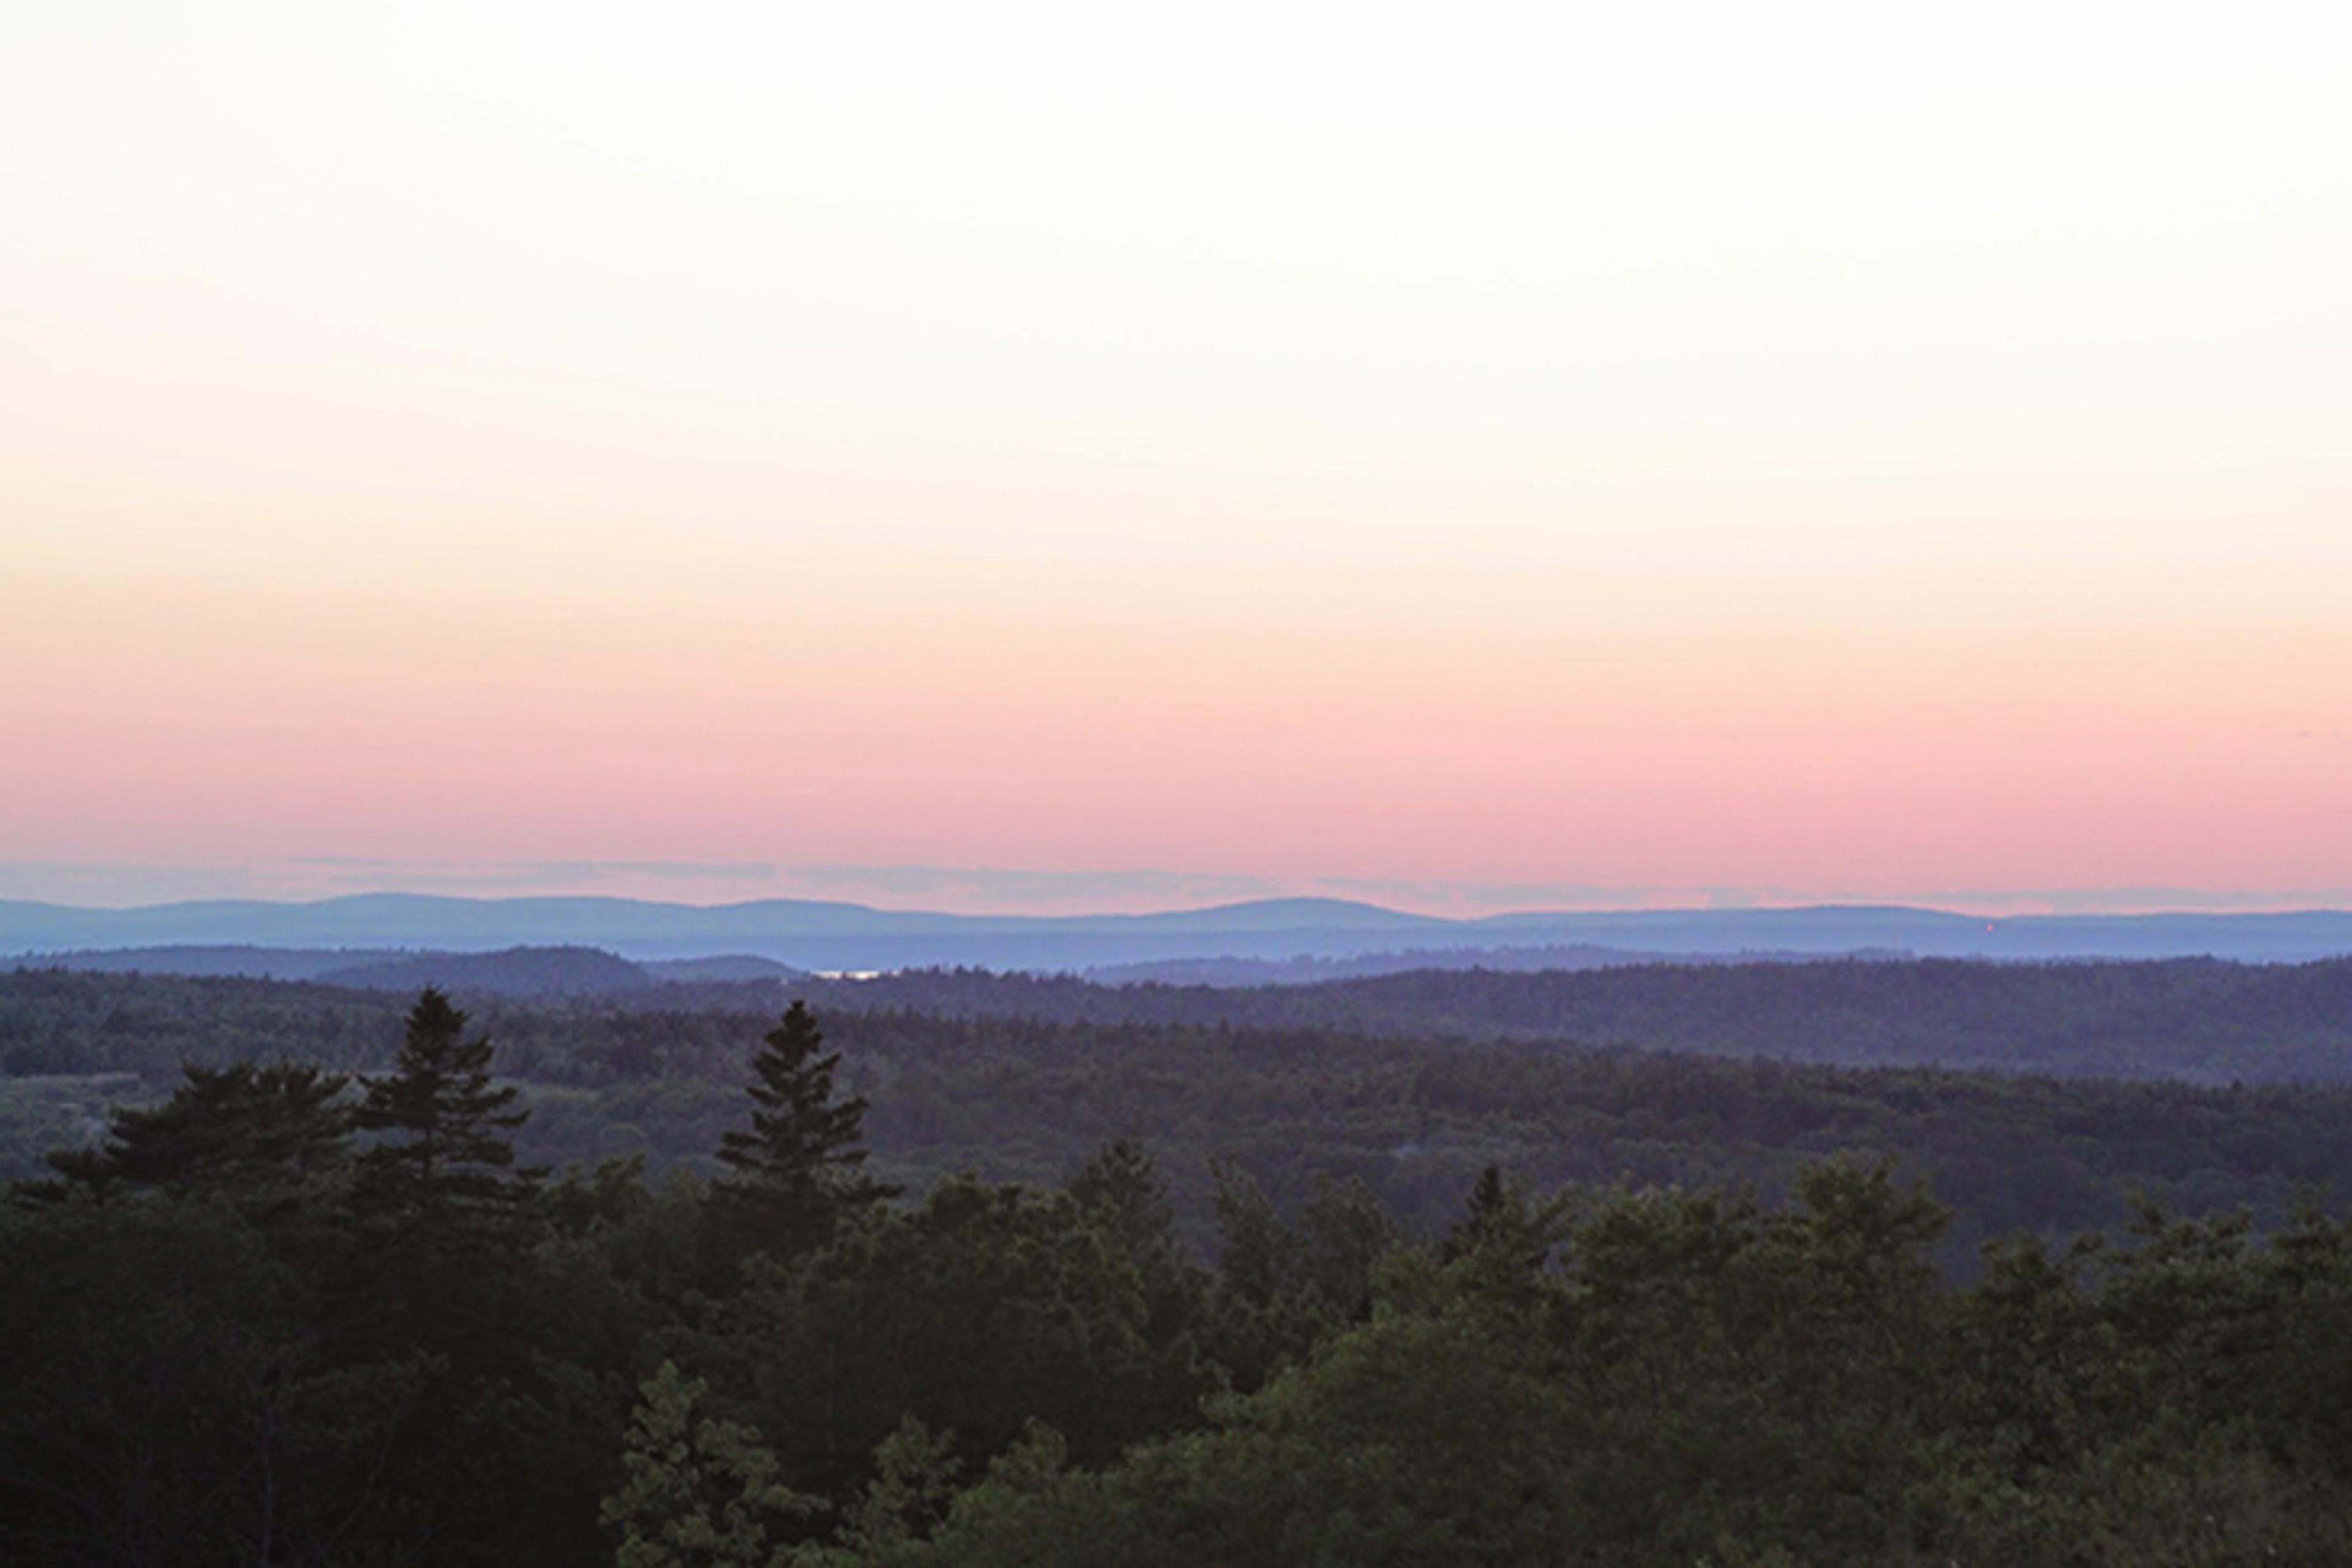 Vermont View Photo by Cedarose Keeley